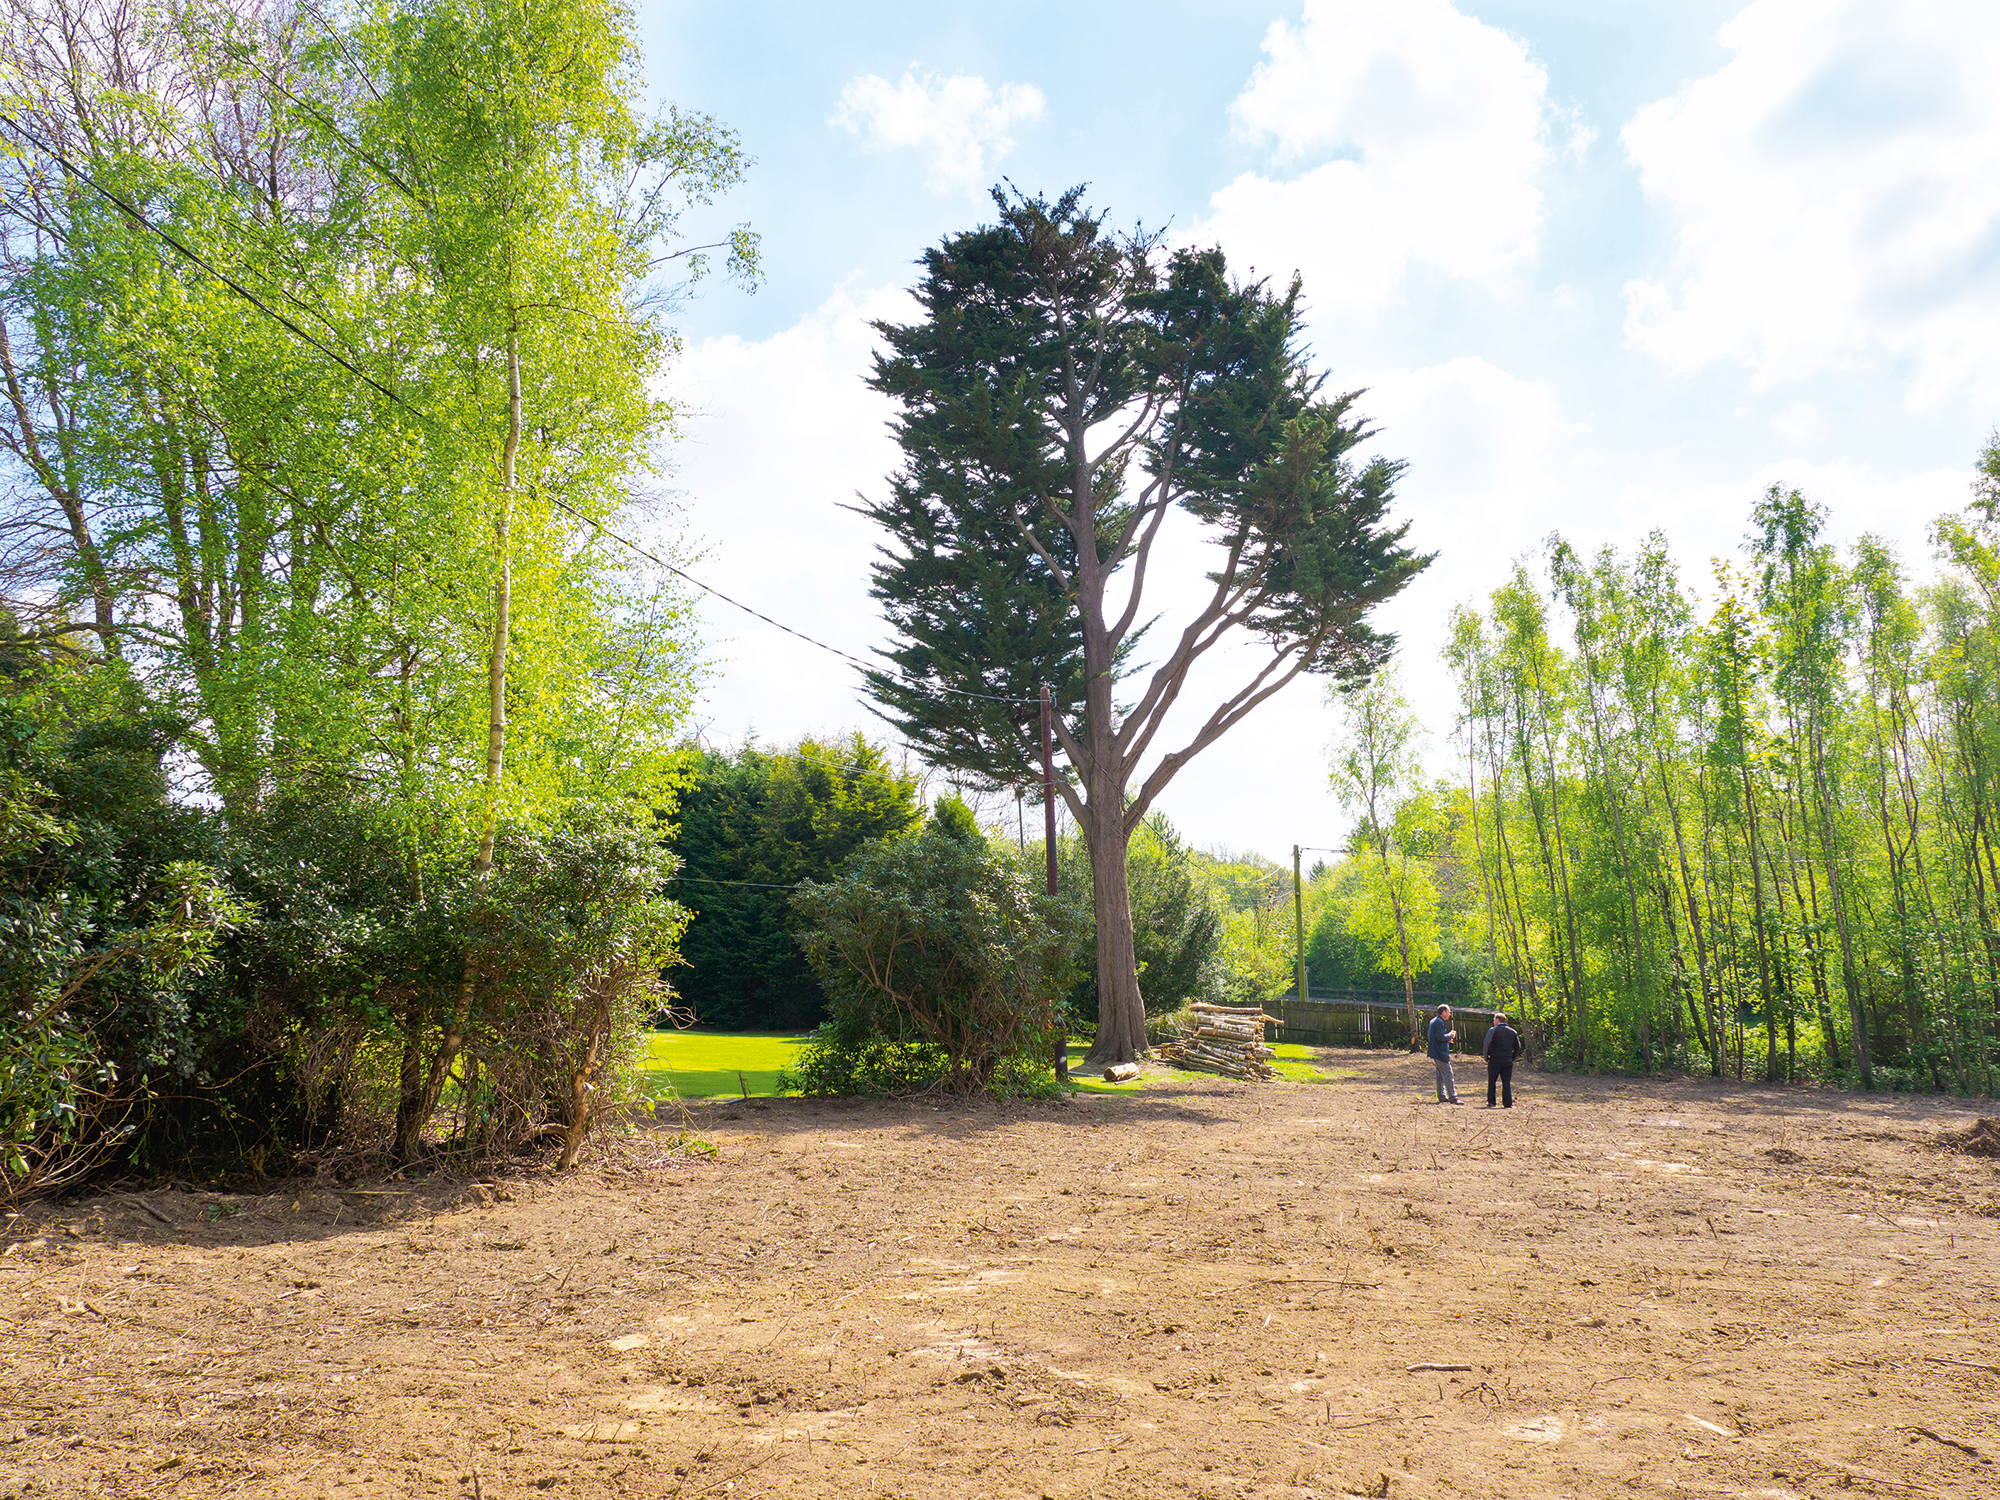 garden infill plot in Kent with tall trees